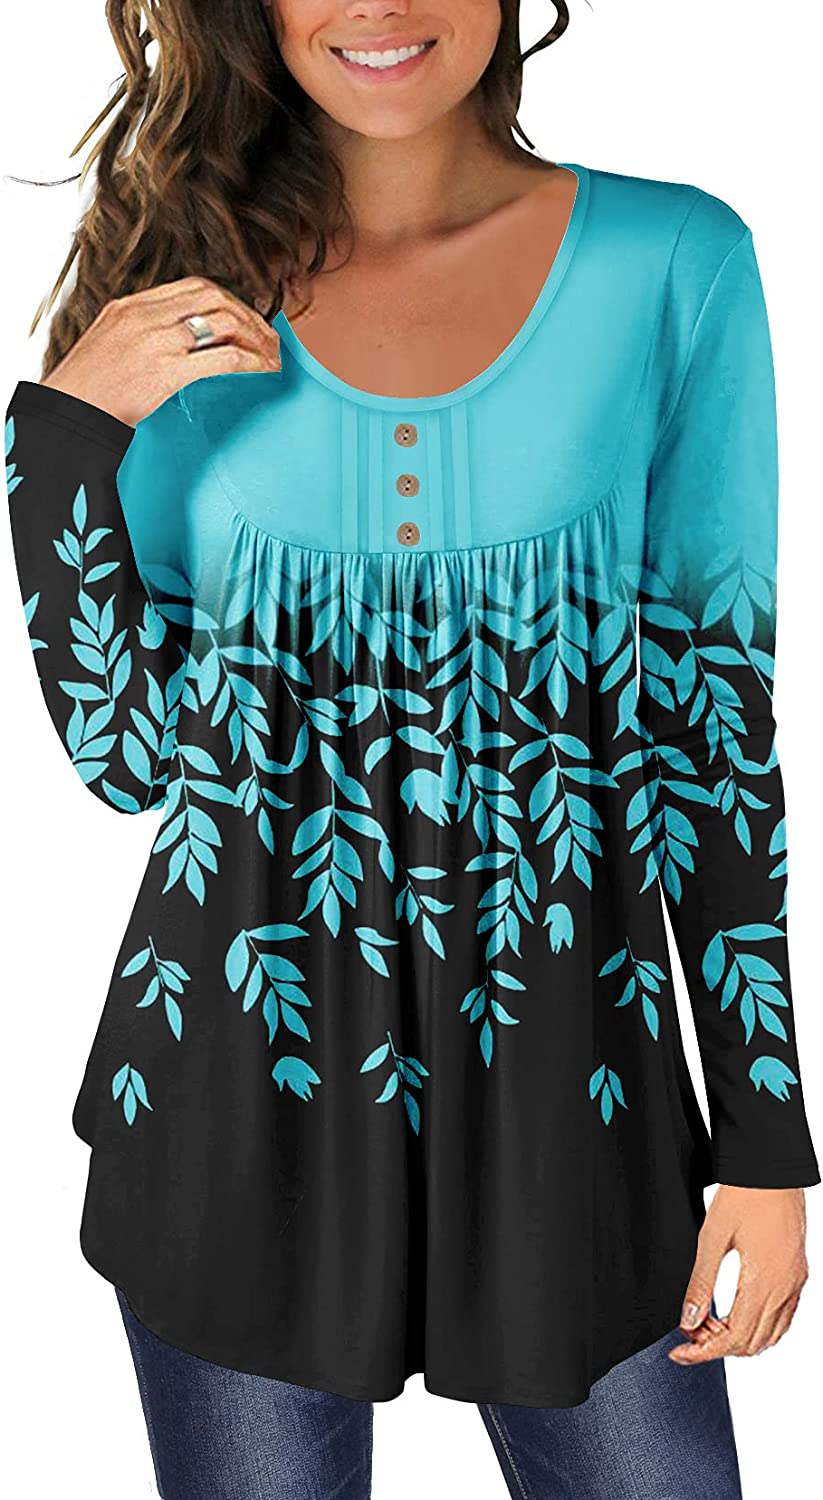 Flowy Long Sleeve Shirts Tunic Tops to Wear with Leggings Dressy Hide Belly  Long Shirt Plus Size Tops for Women V-Neck Solid Comfy White XL -  Walmart.com